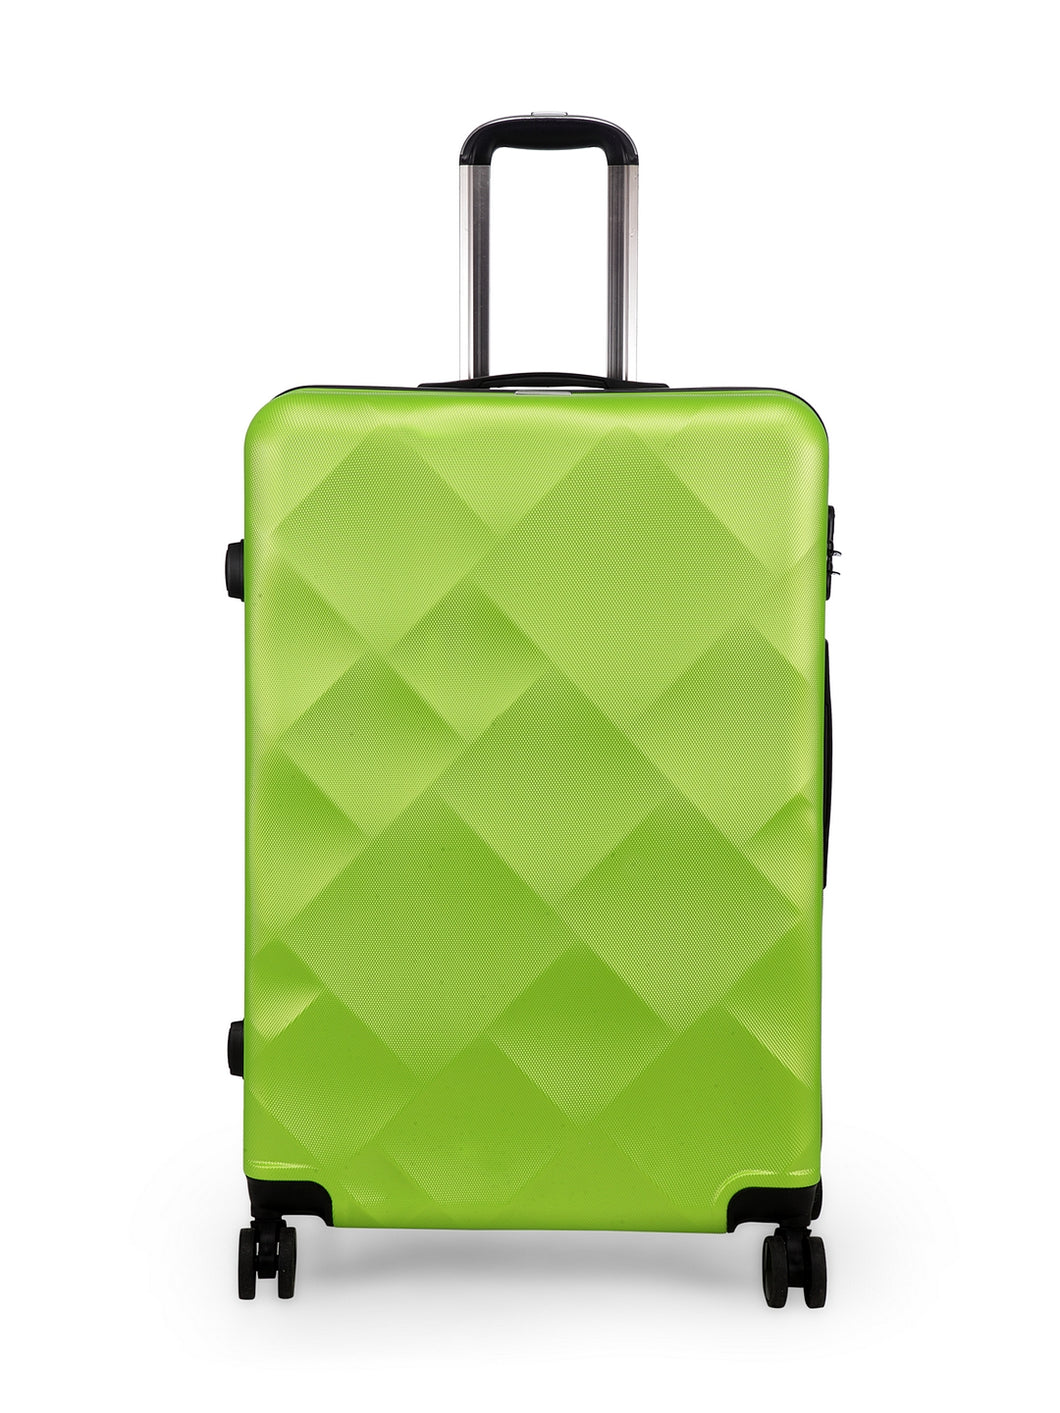 Unisex Green Textured Hard-Sided Large Trolley Suitcase